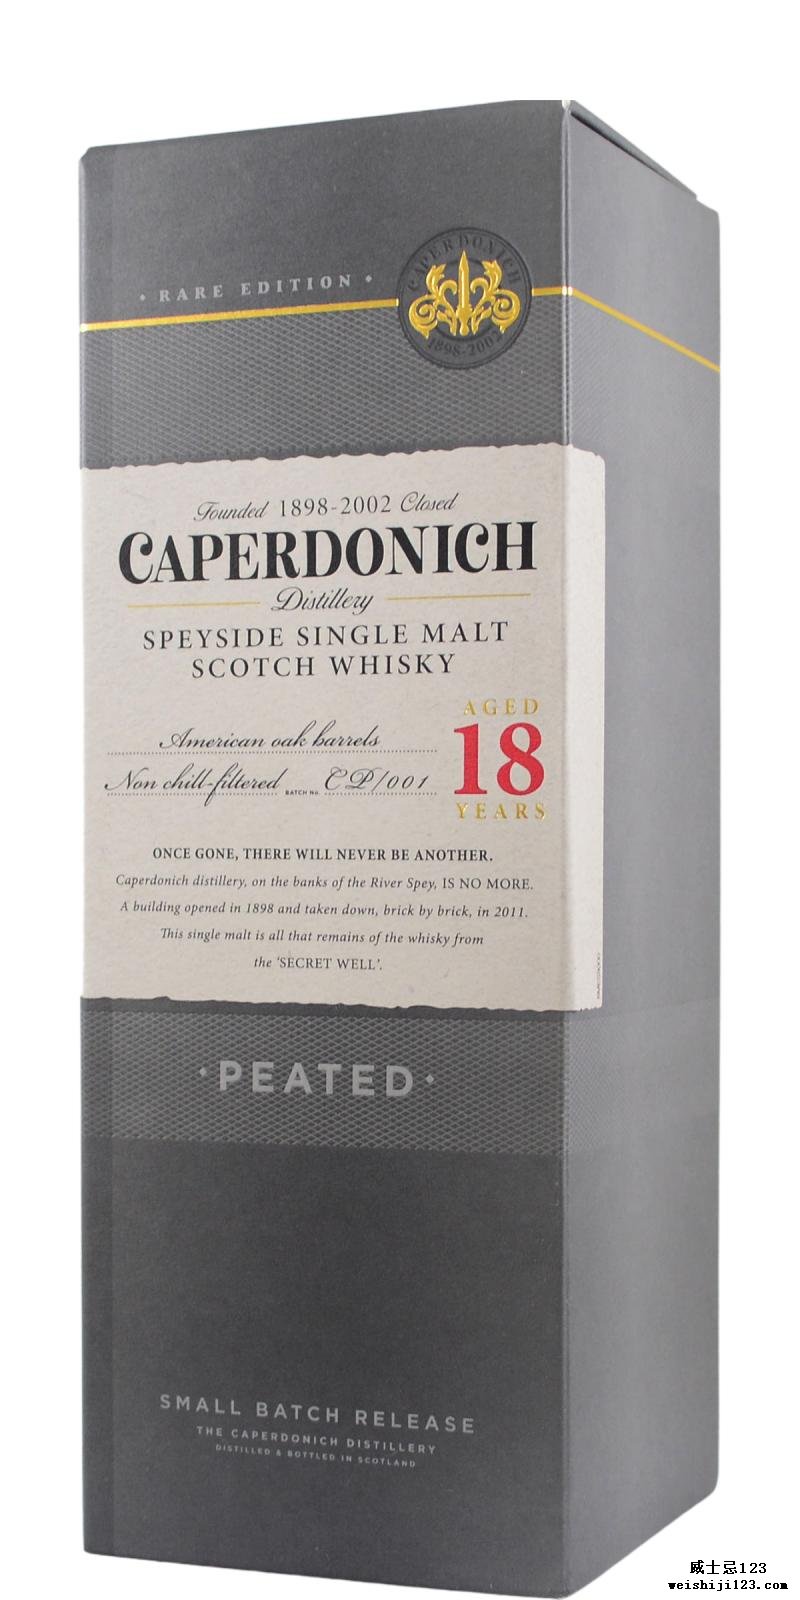 Caperdonich 18-year-old - Peated